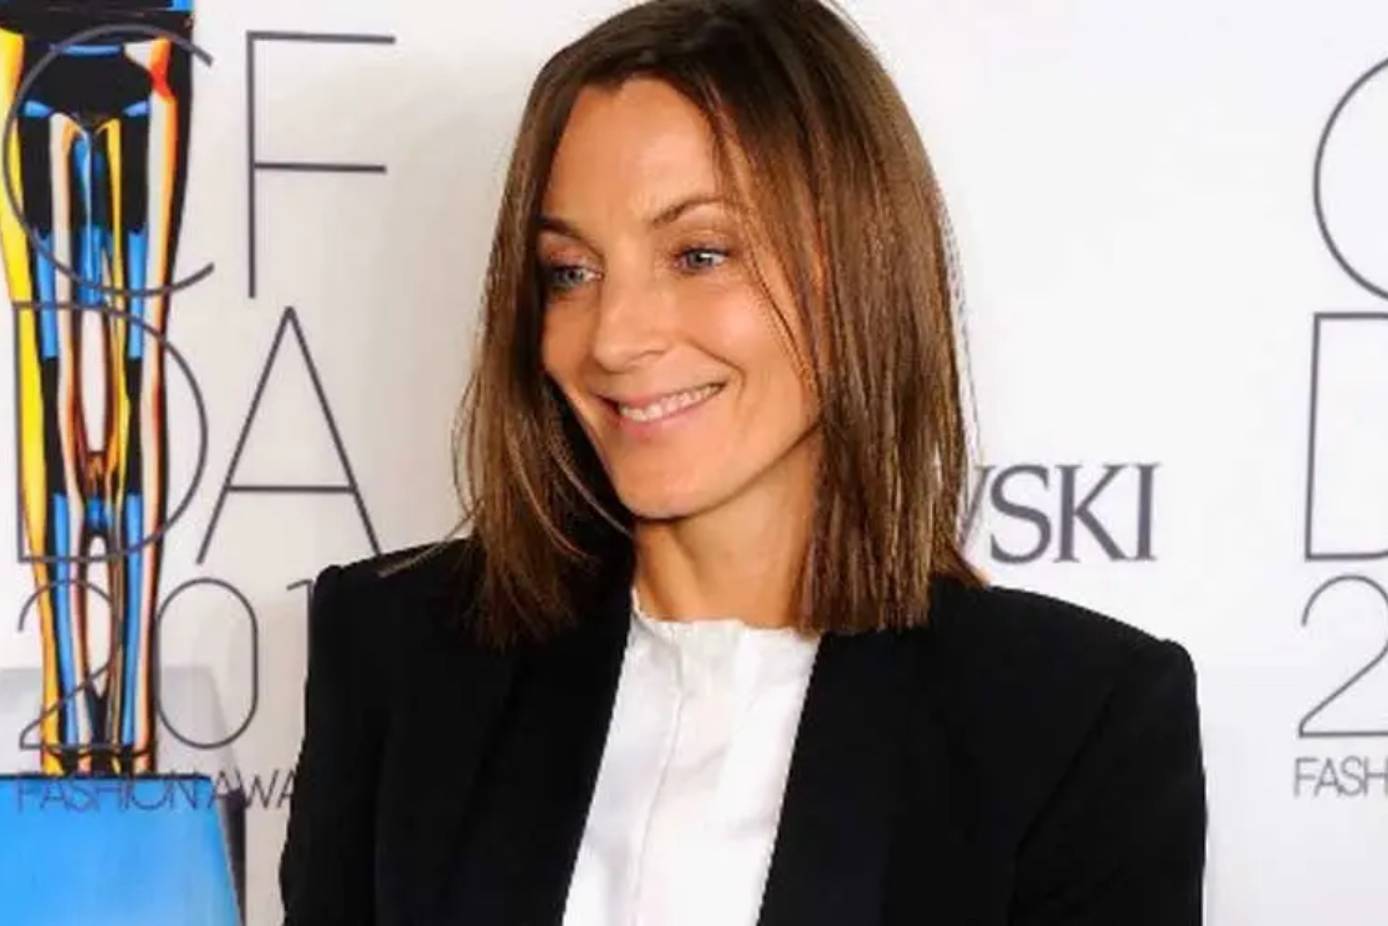 About Phoebe Philo